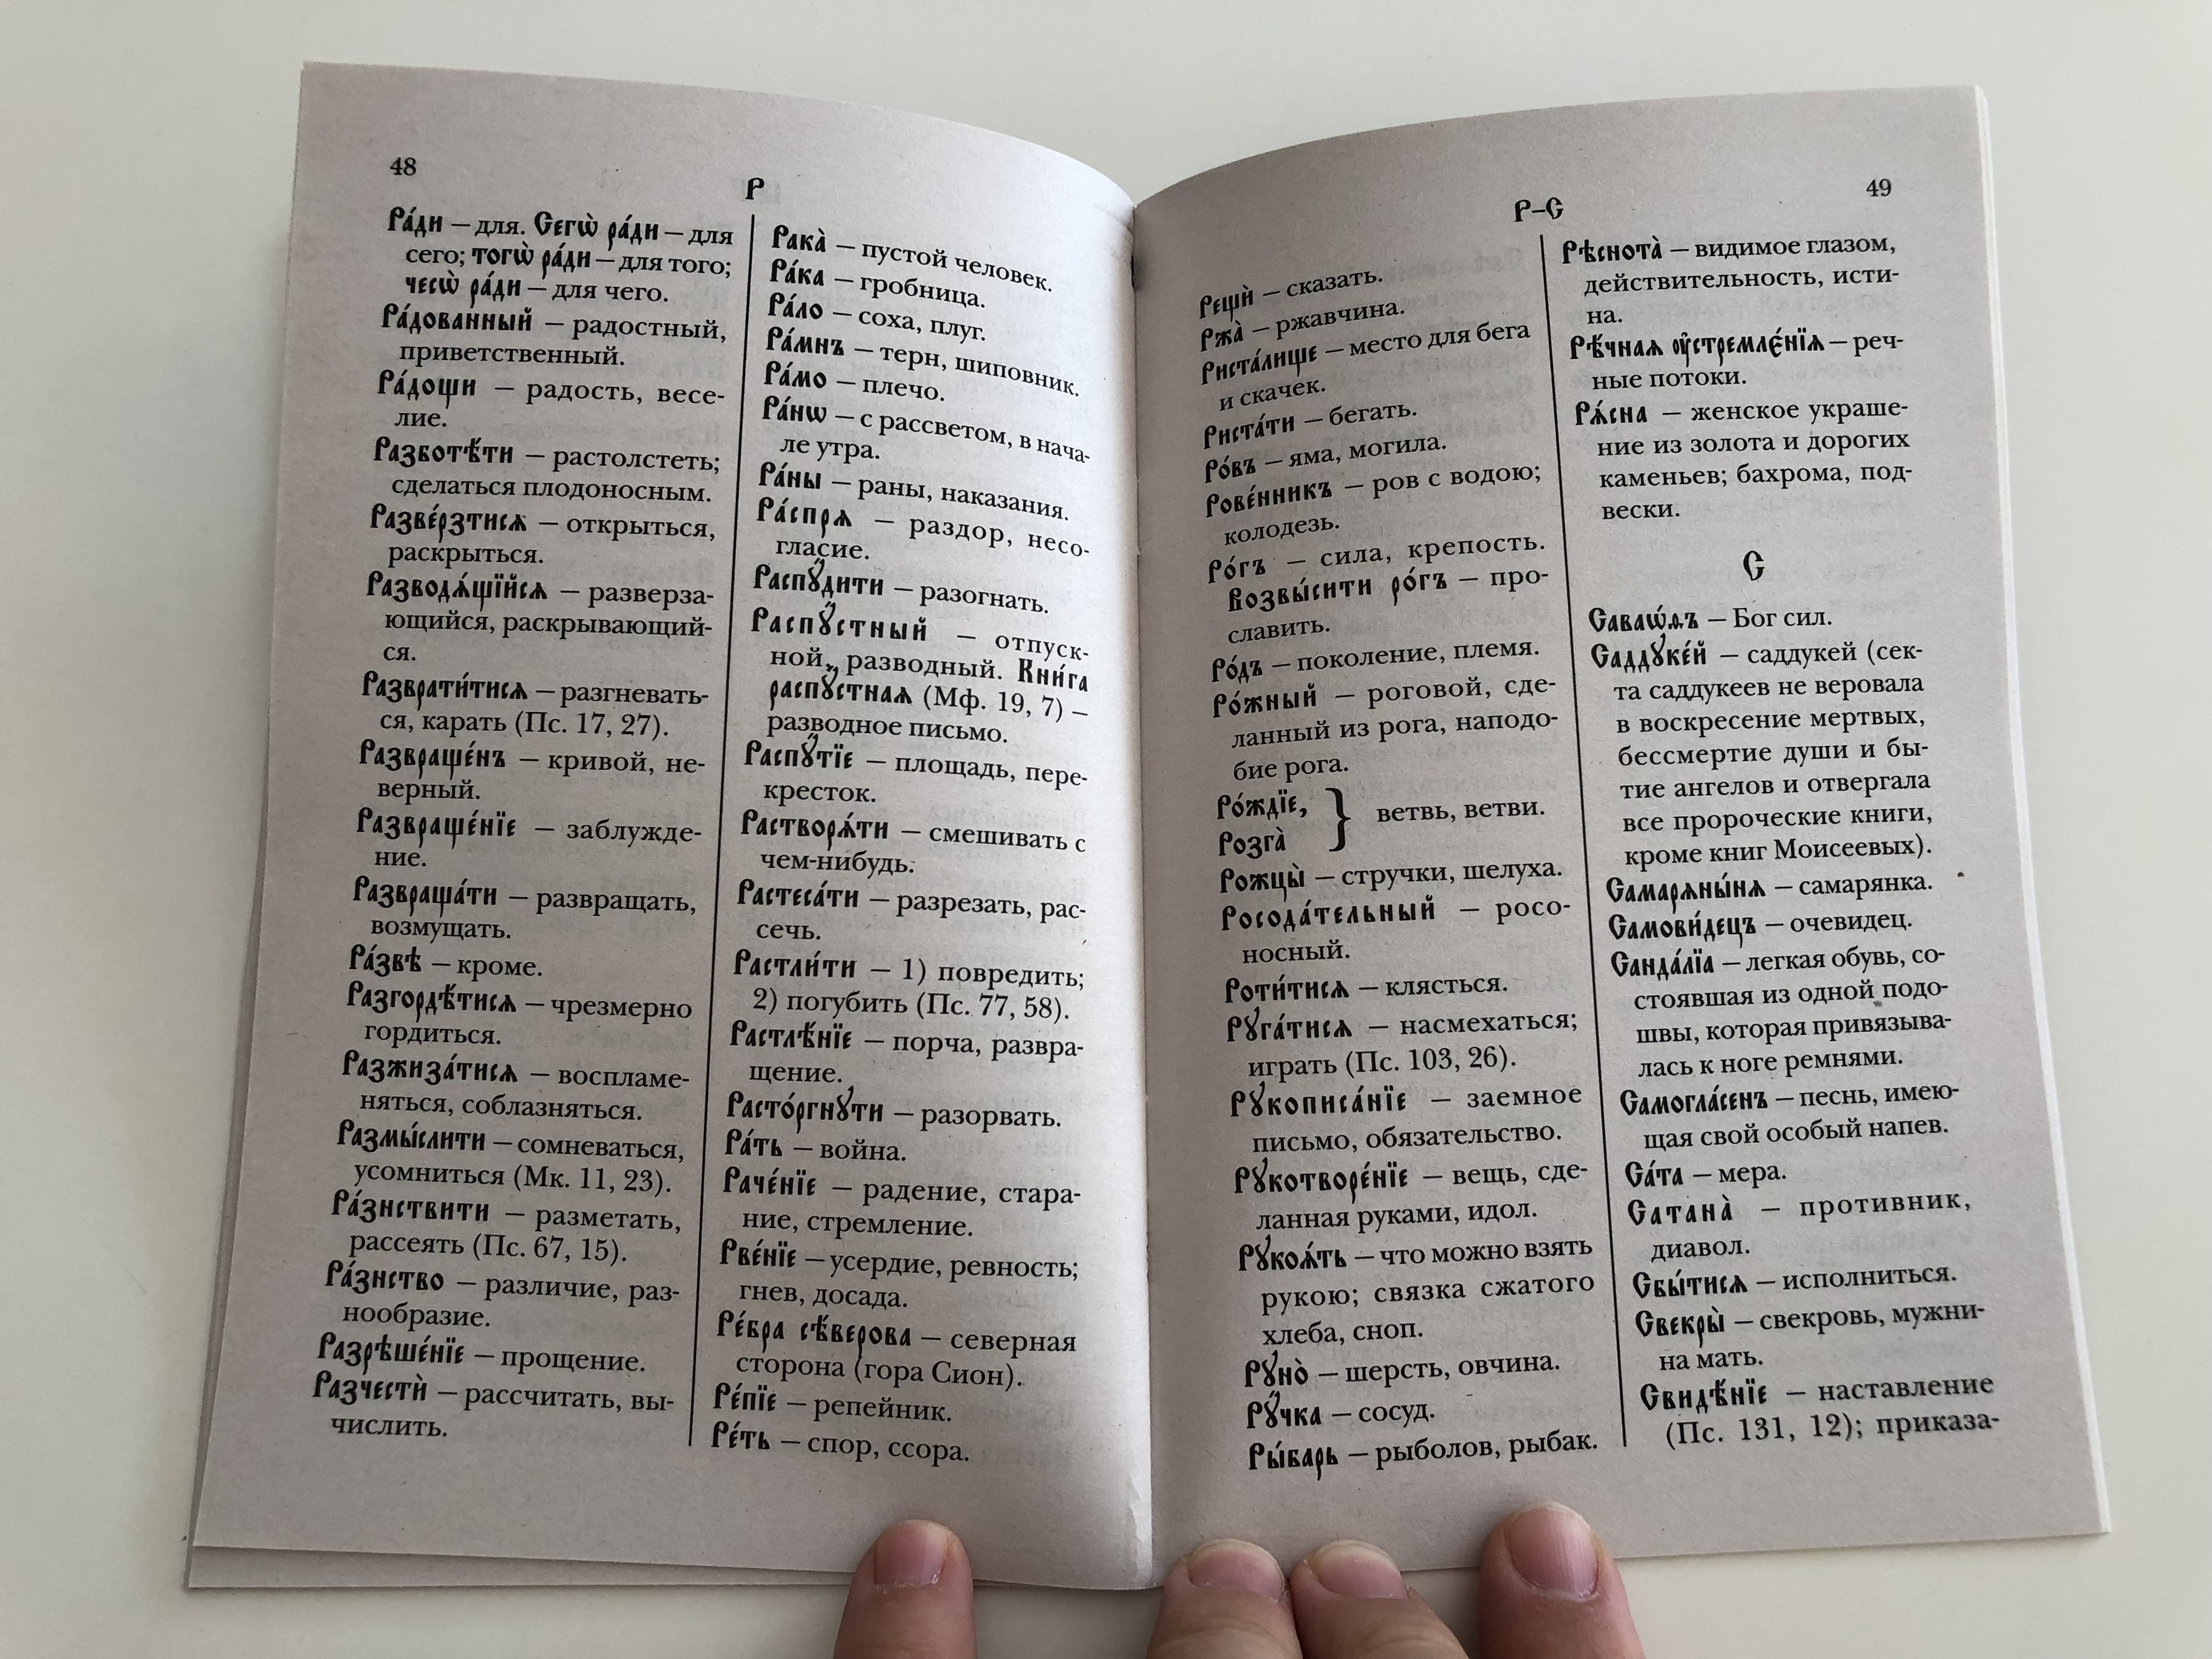 -orthodox-russian-dictionary-of-church-slavonic-liturgical-words-2018-8-.jpg